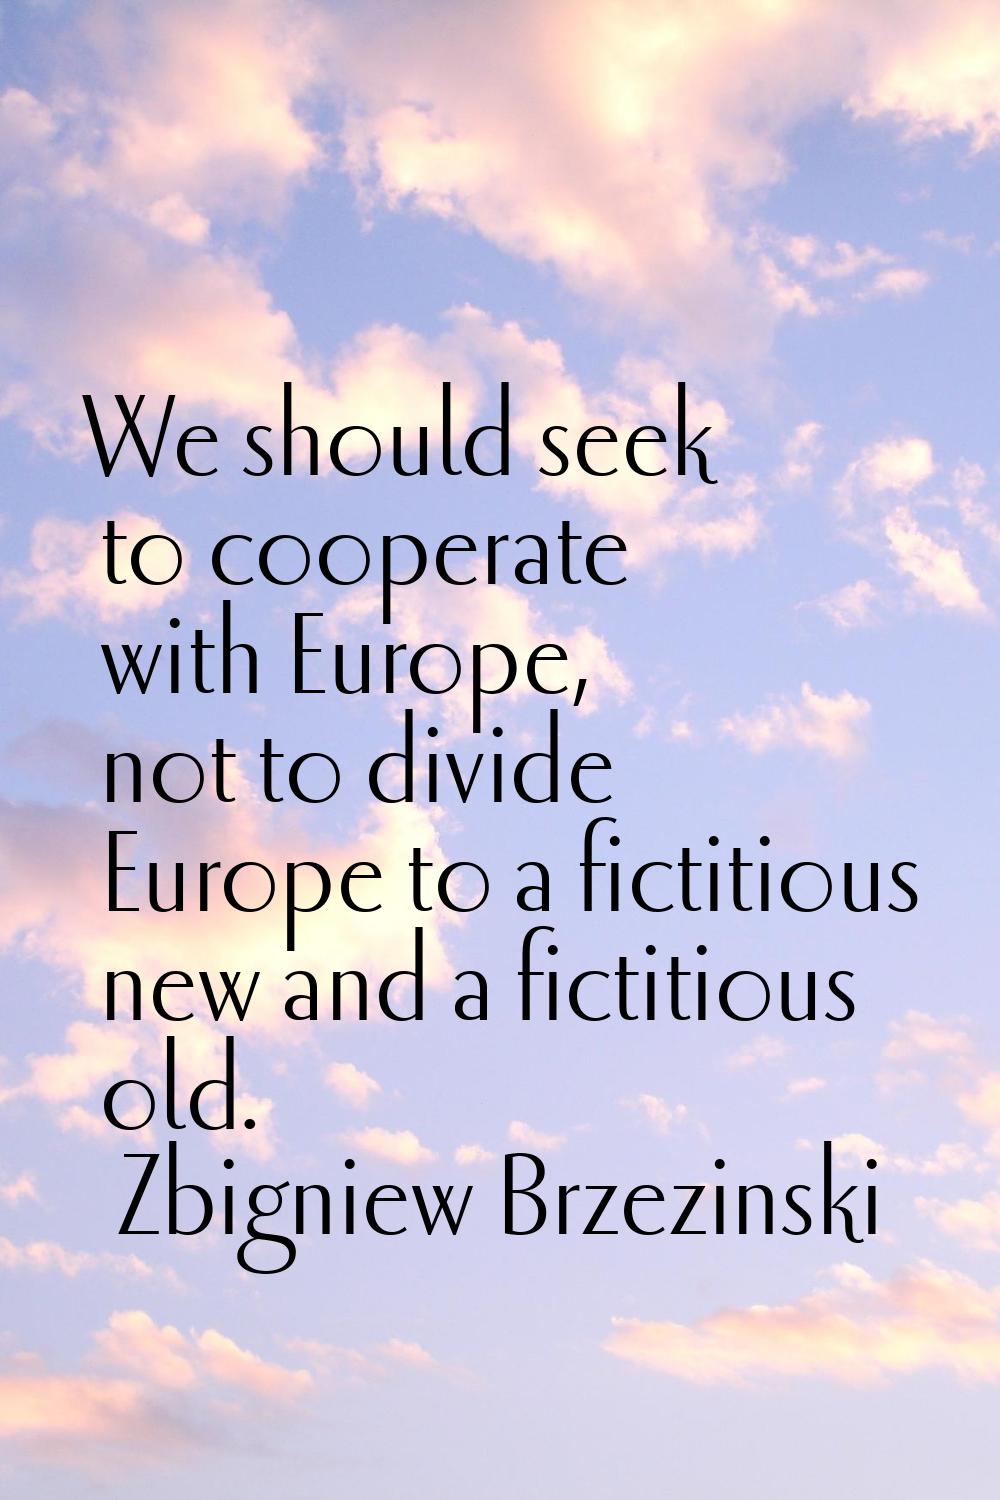 We should seek to cooperate with Europe, not to divide Europe to a fictitious new and a fictitious 